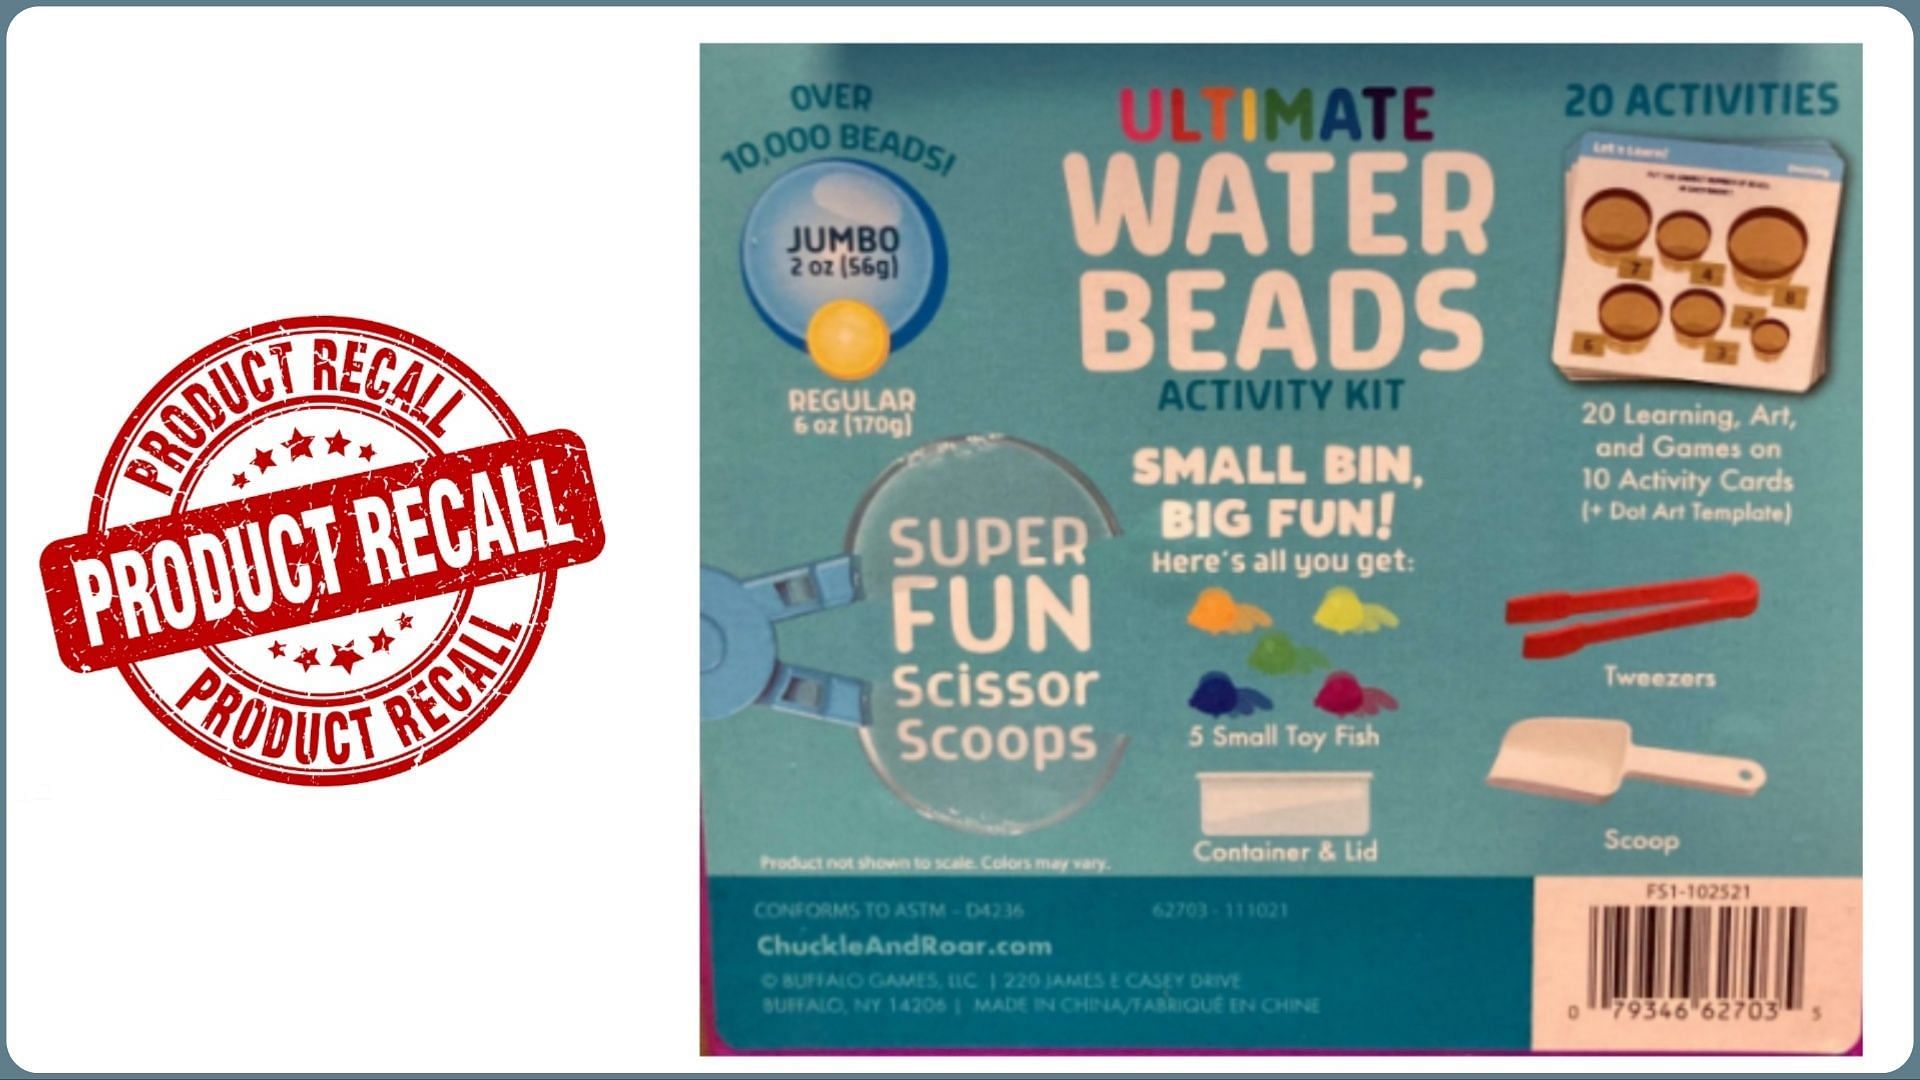 Water beads recall Reason, brand, UPC Number, and all you need to know